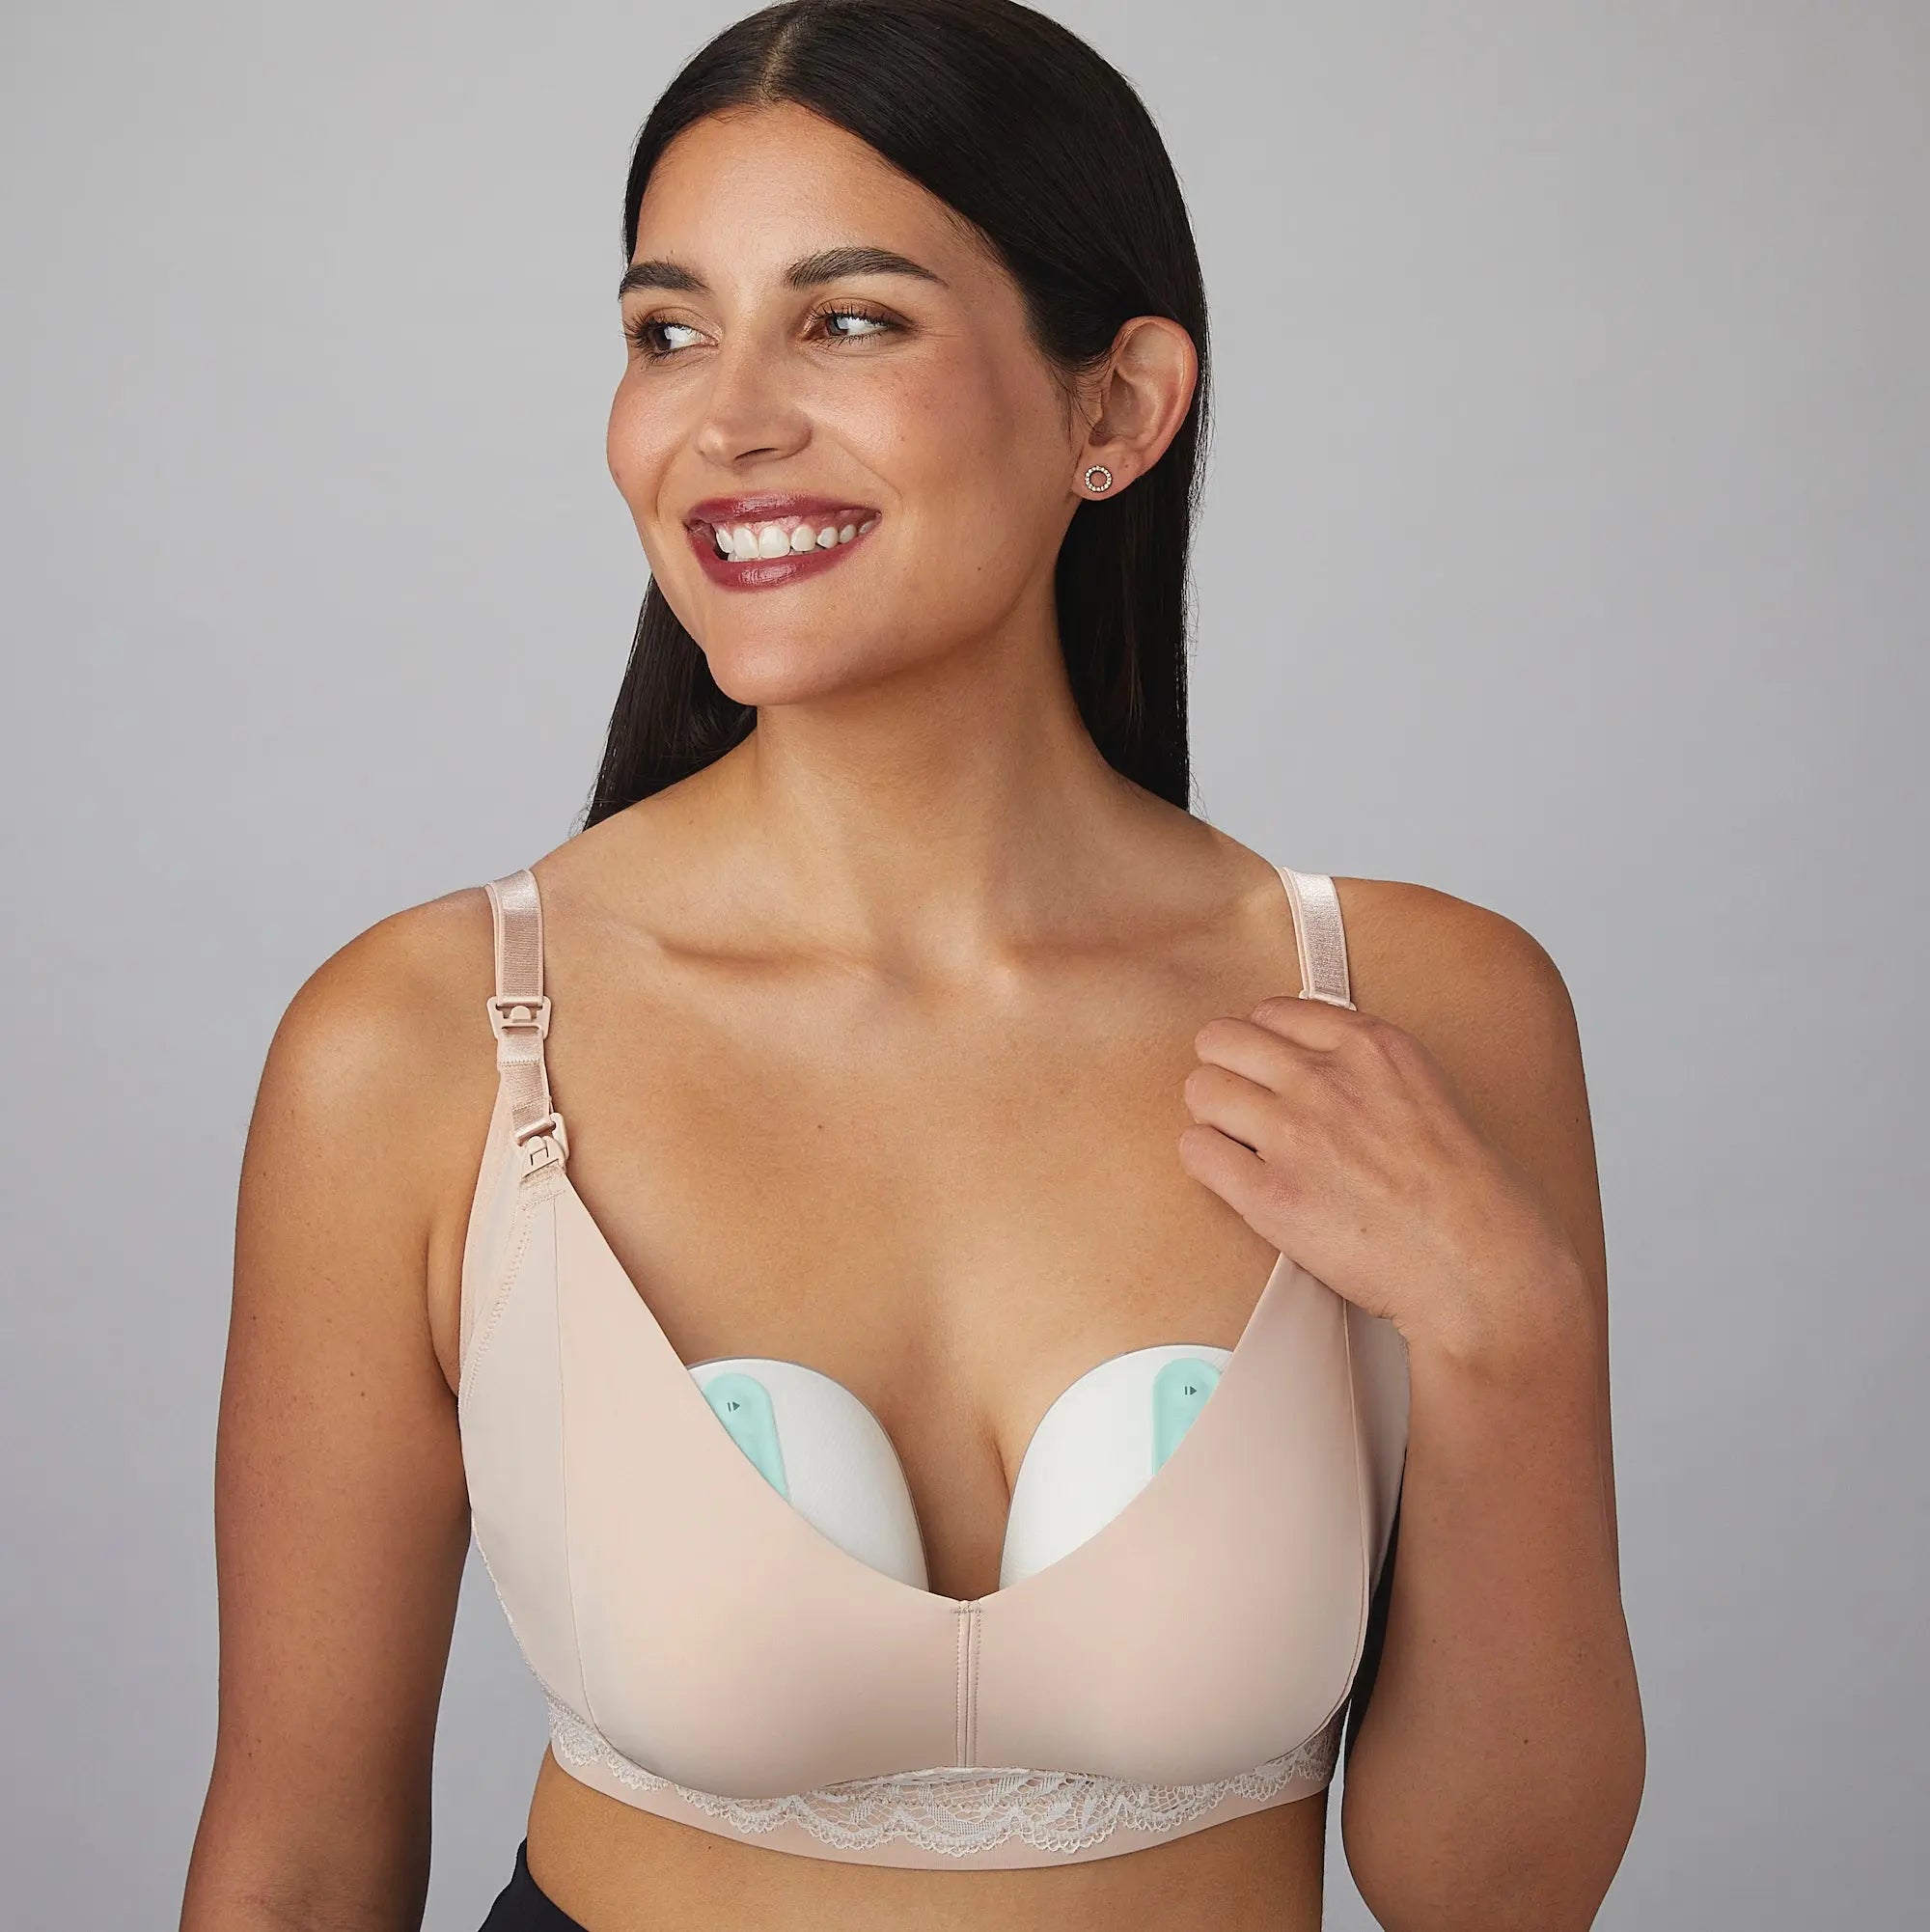 Nursing bra, microfiber, easy open cups, small dots, B to H-cup